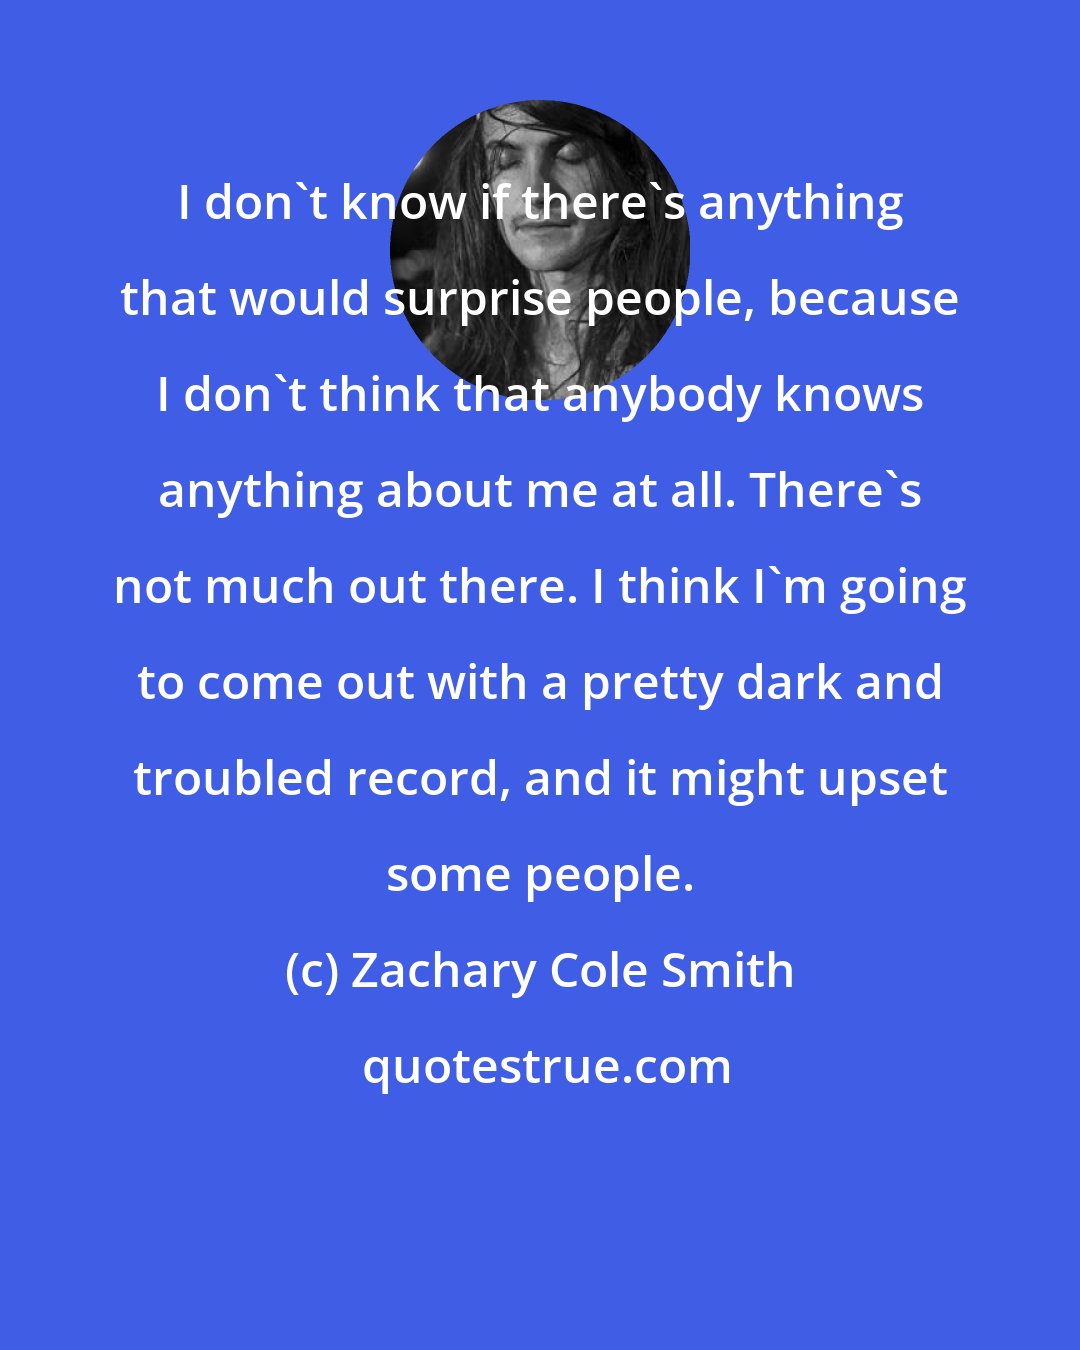 Zachary Cole Smith: I don't know if there's anything that would surprise people, because I don't think that anybody knows anything about me at all. There's not much out there. I think I'm going to come out with a pretty dark and troubled record, and it might upset some people.